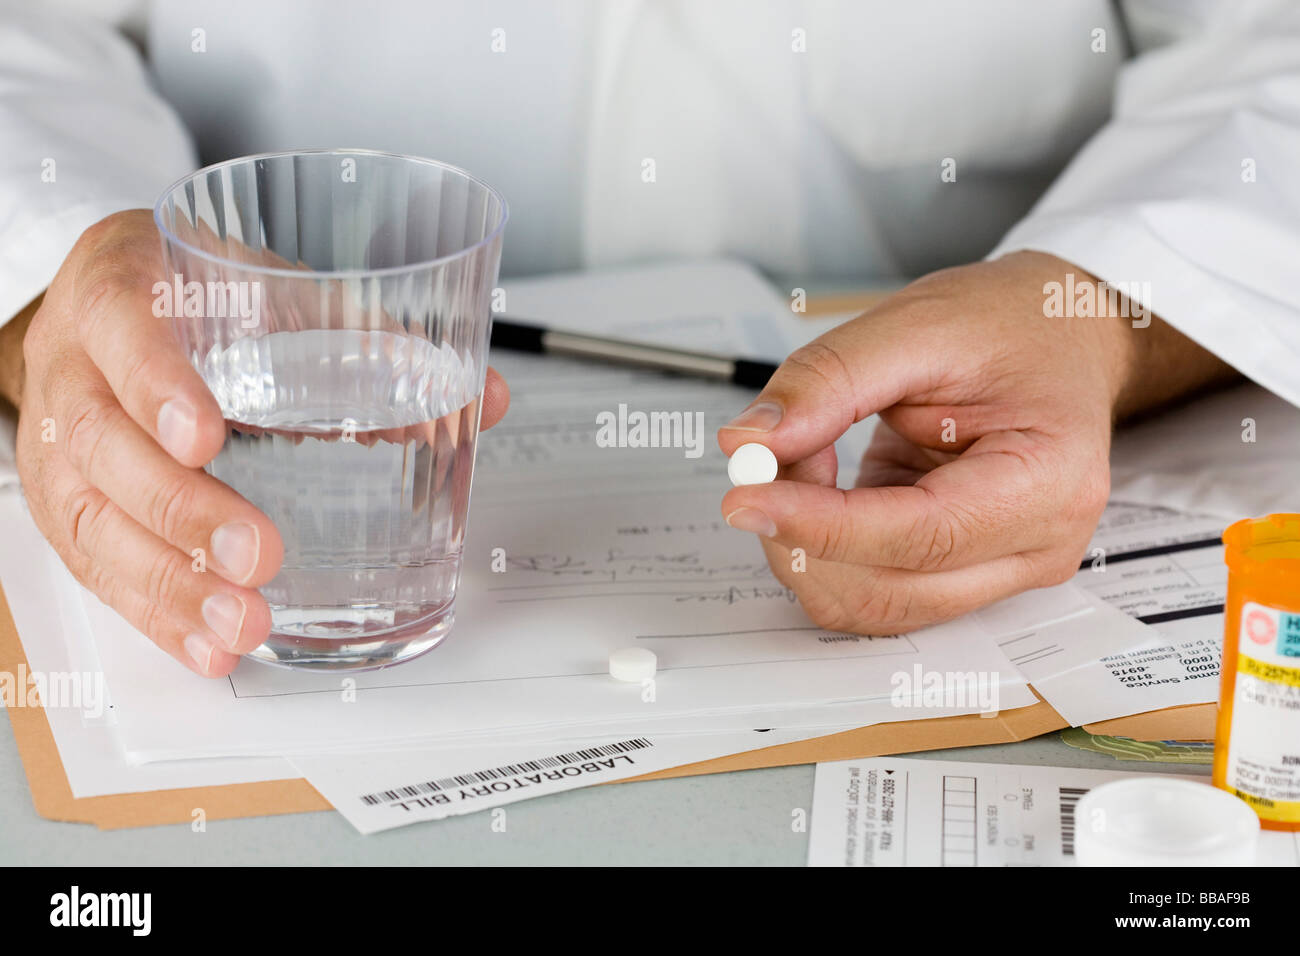 A doctor offering a pill and glass of water Stock Photo